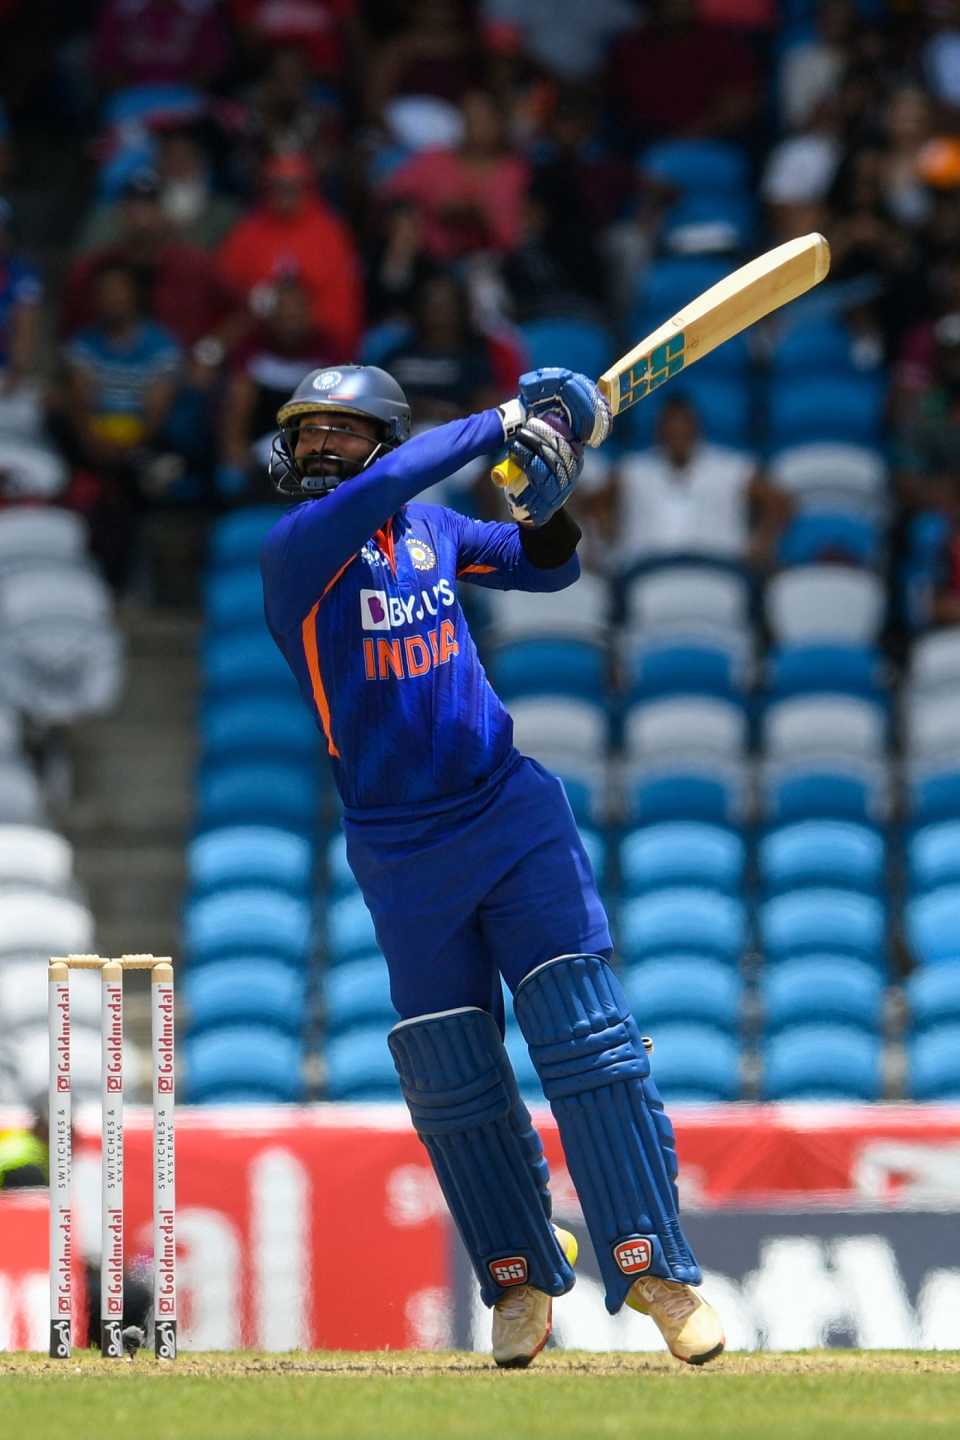 Dinesh Karthik hits over covers, West Indies vs India, 1st T20I, Tarouba, July 29, 2022
